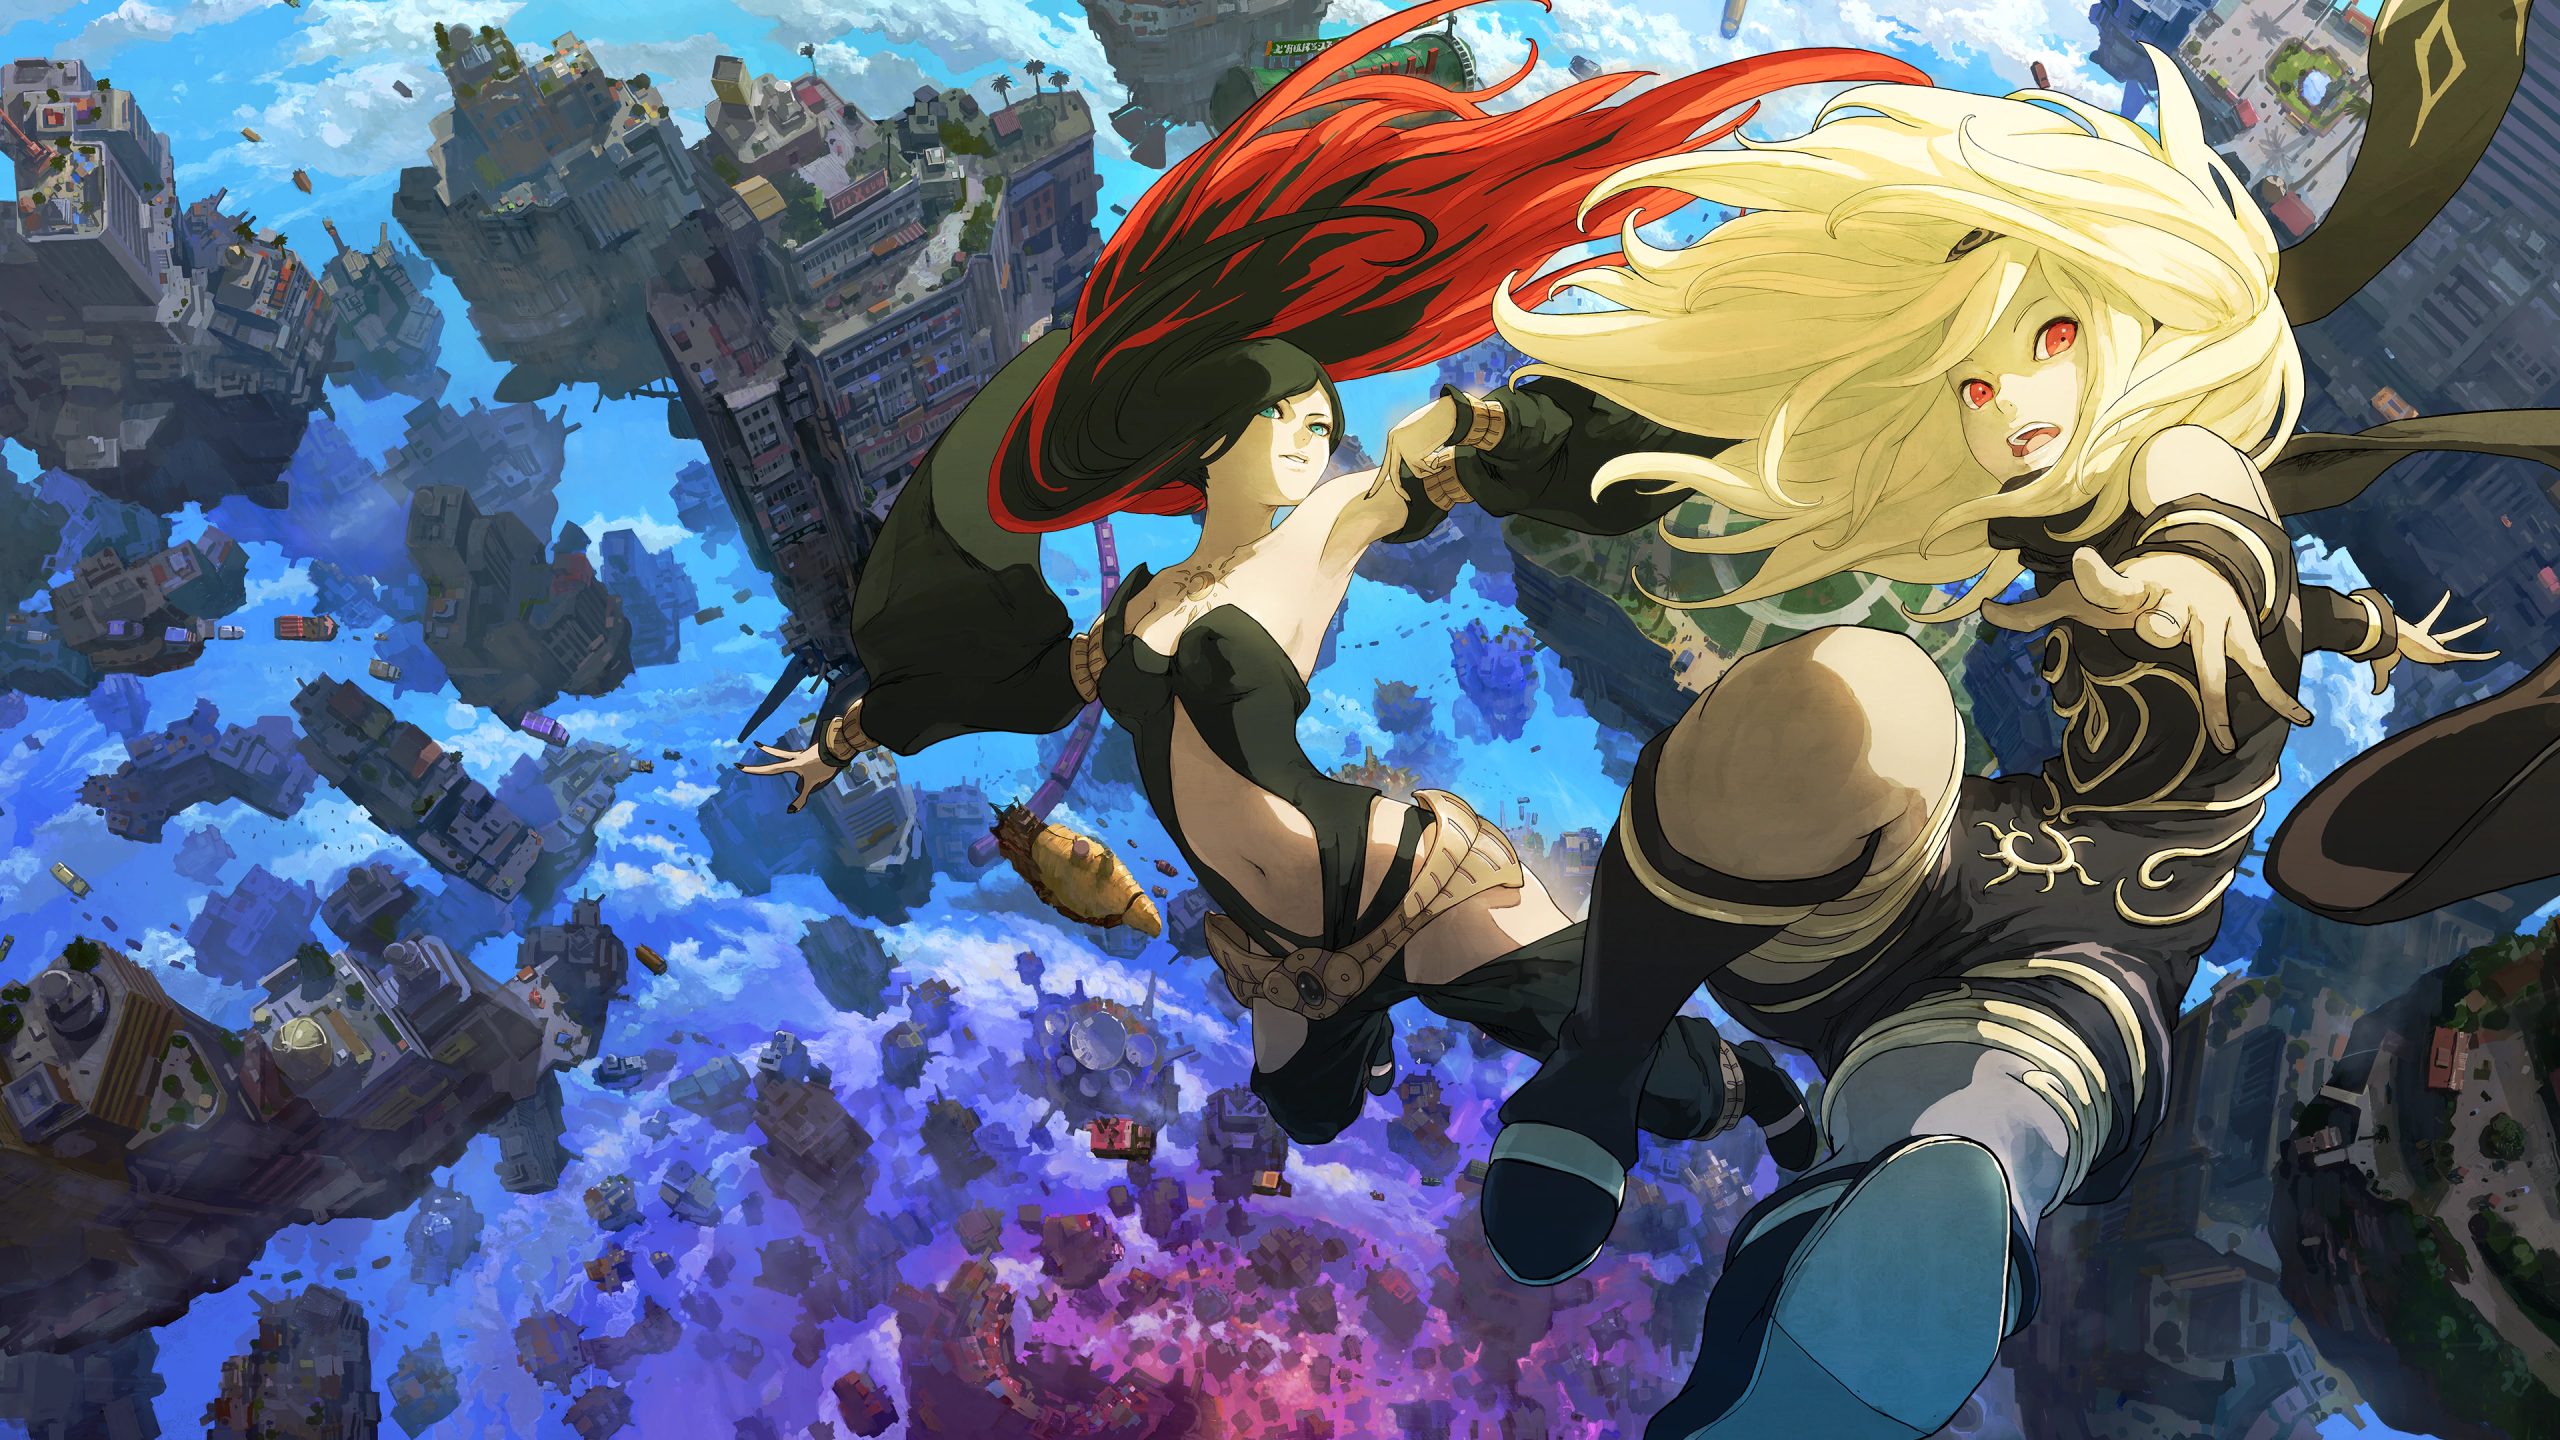 Gravity rush central